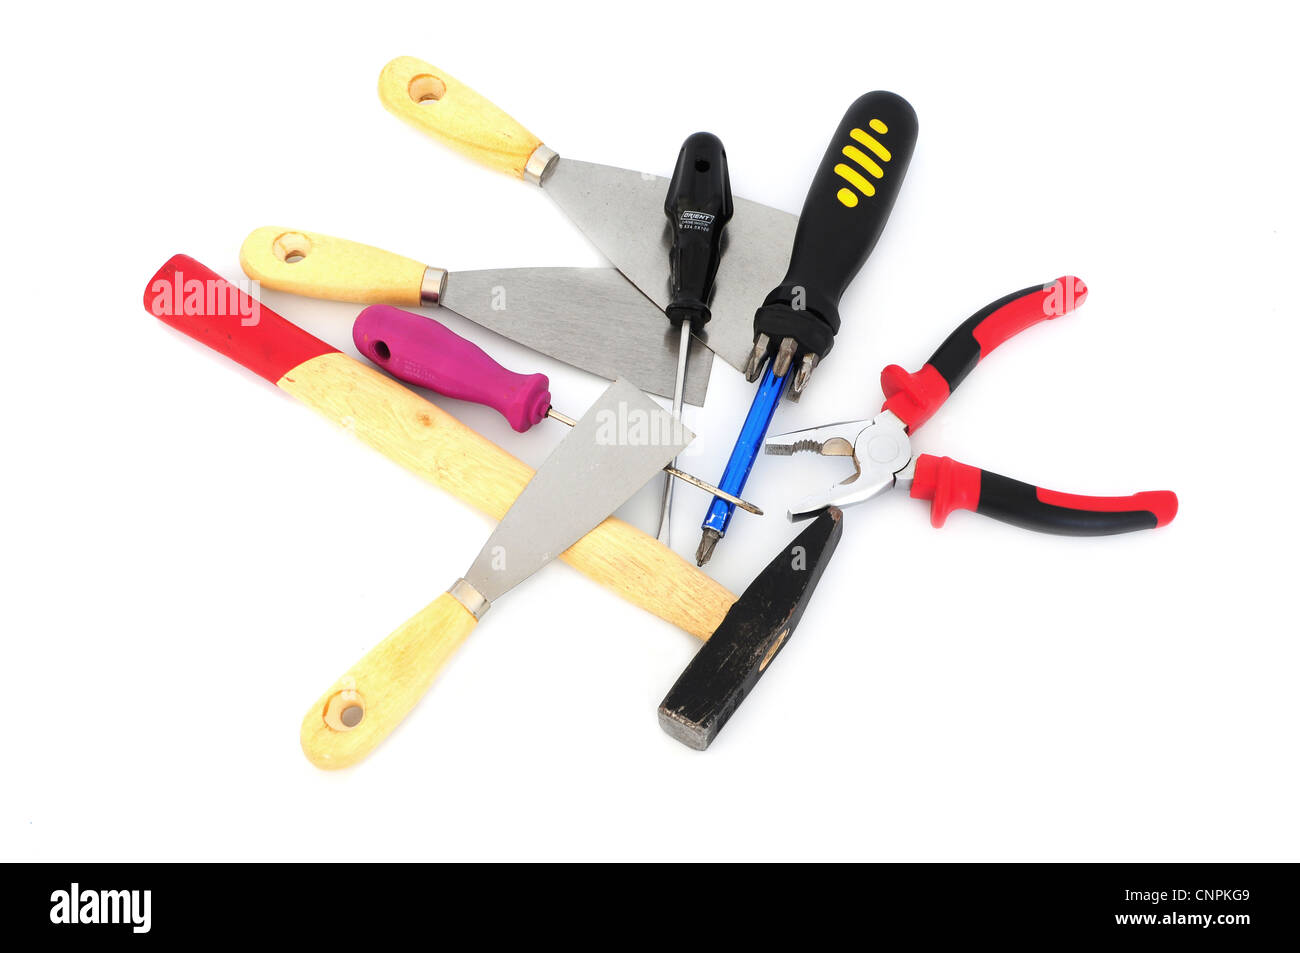 Different tools - hammer, pliers, screwdrivers,spatula Stock Photo